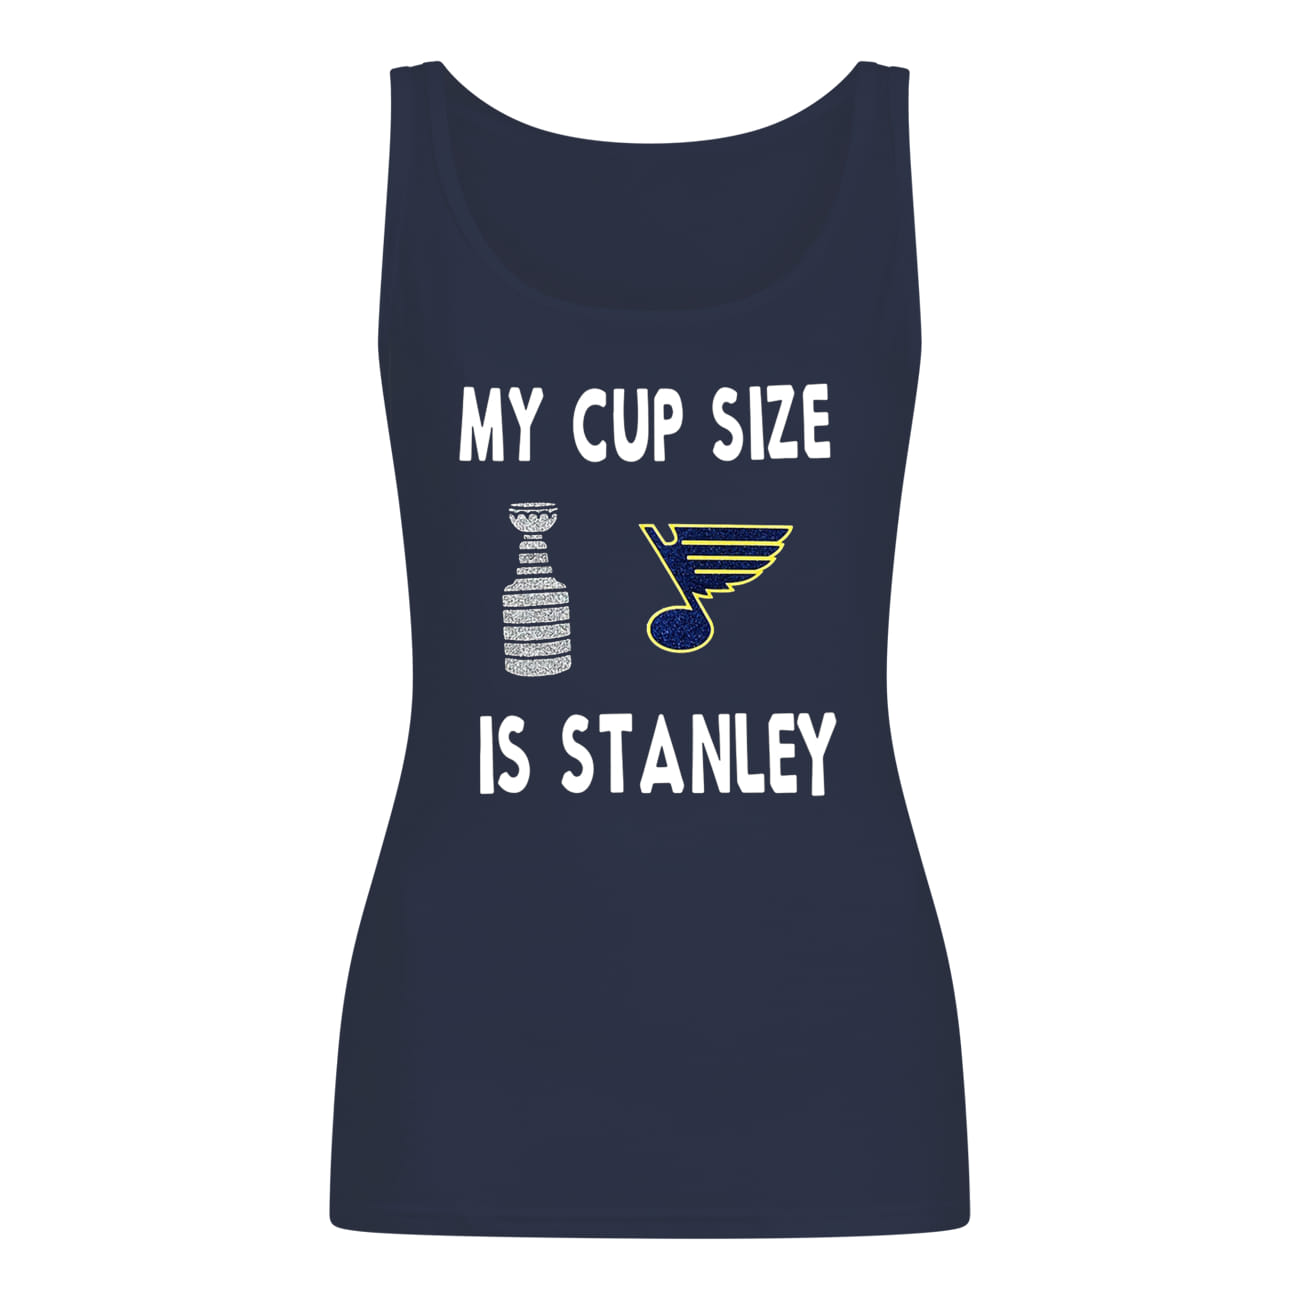 My cup size is stanley hockey tank top